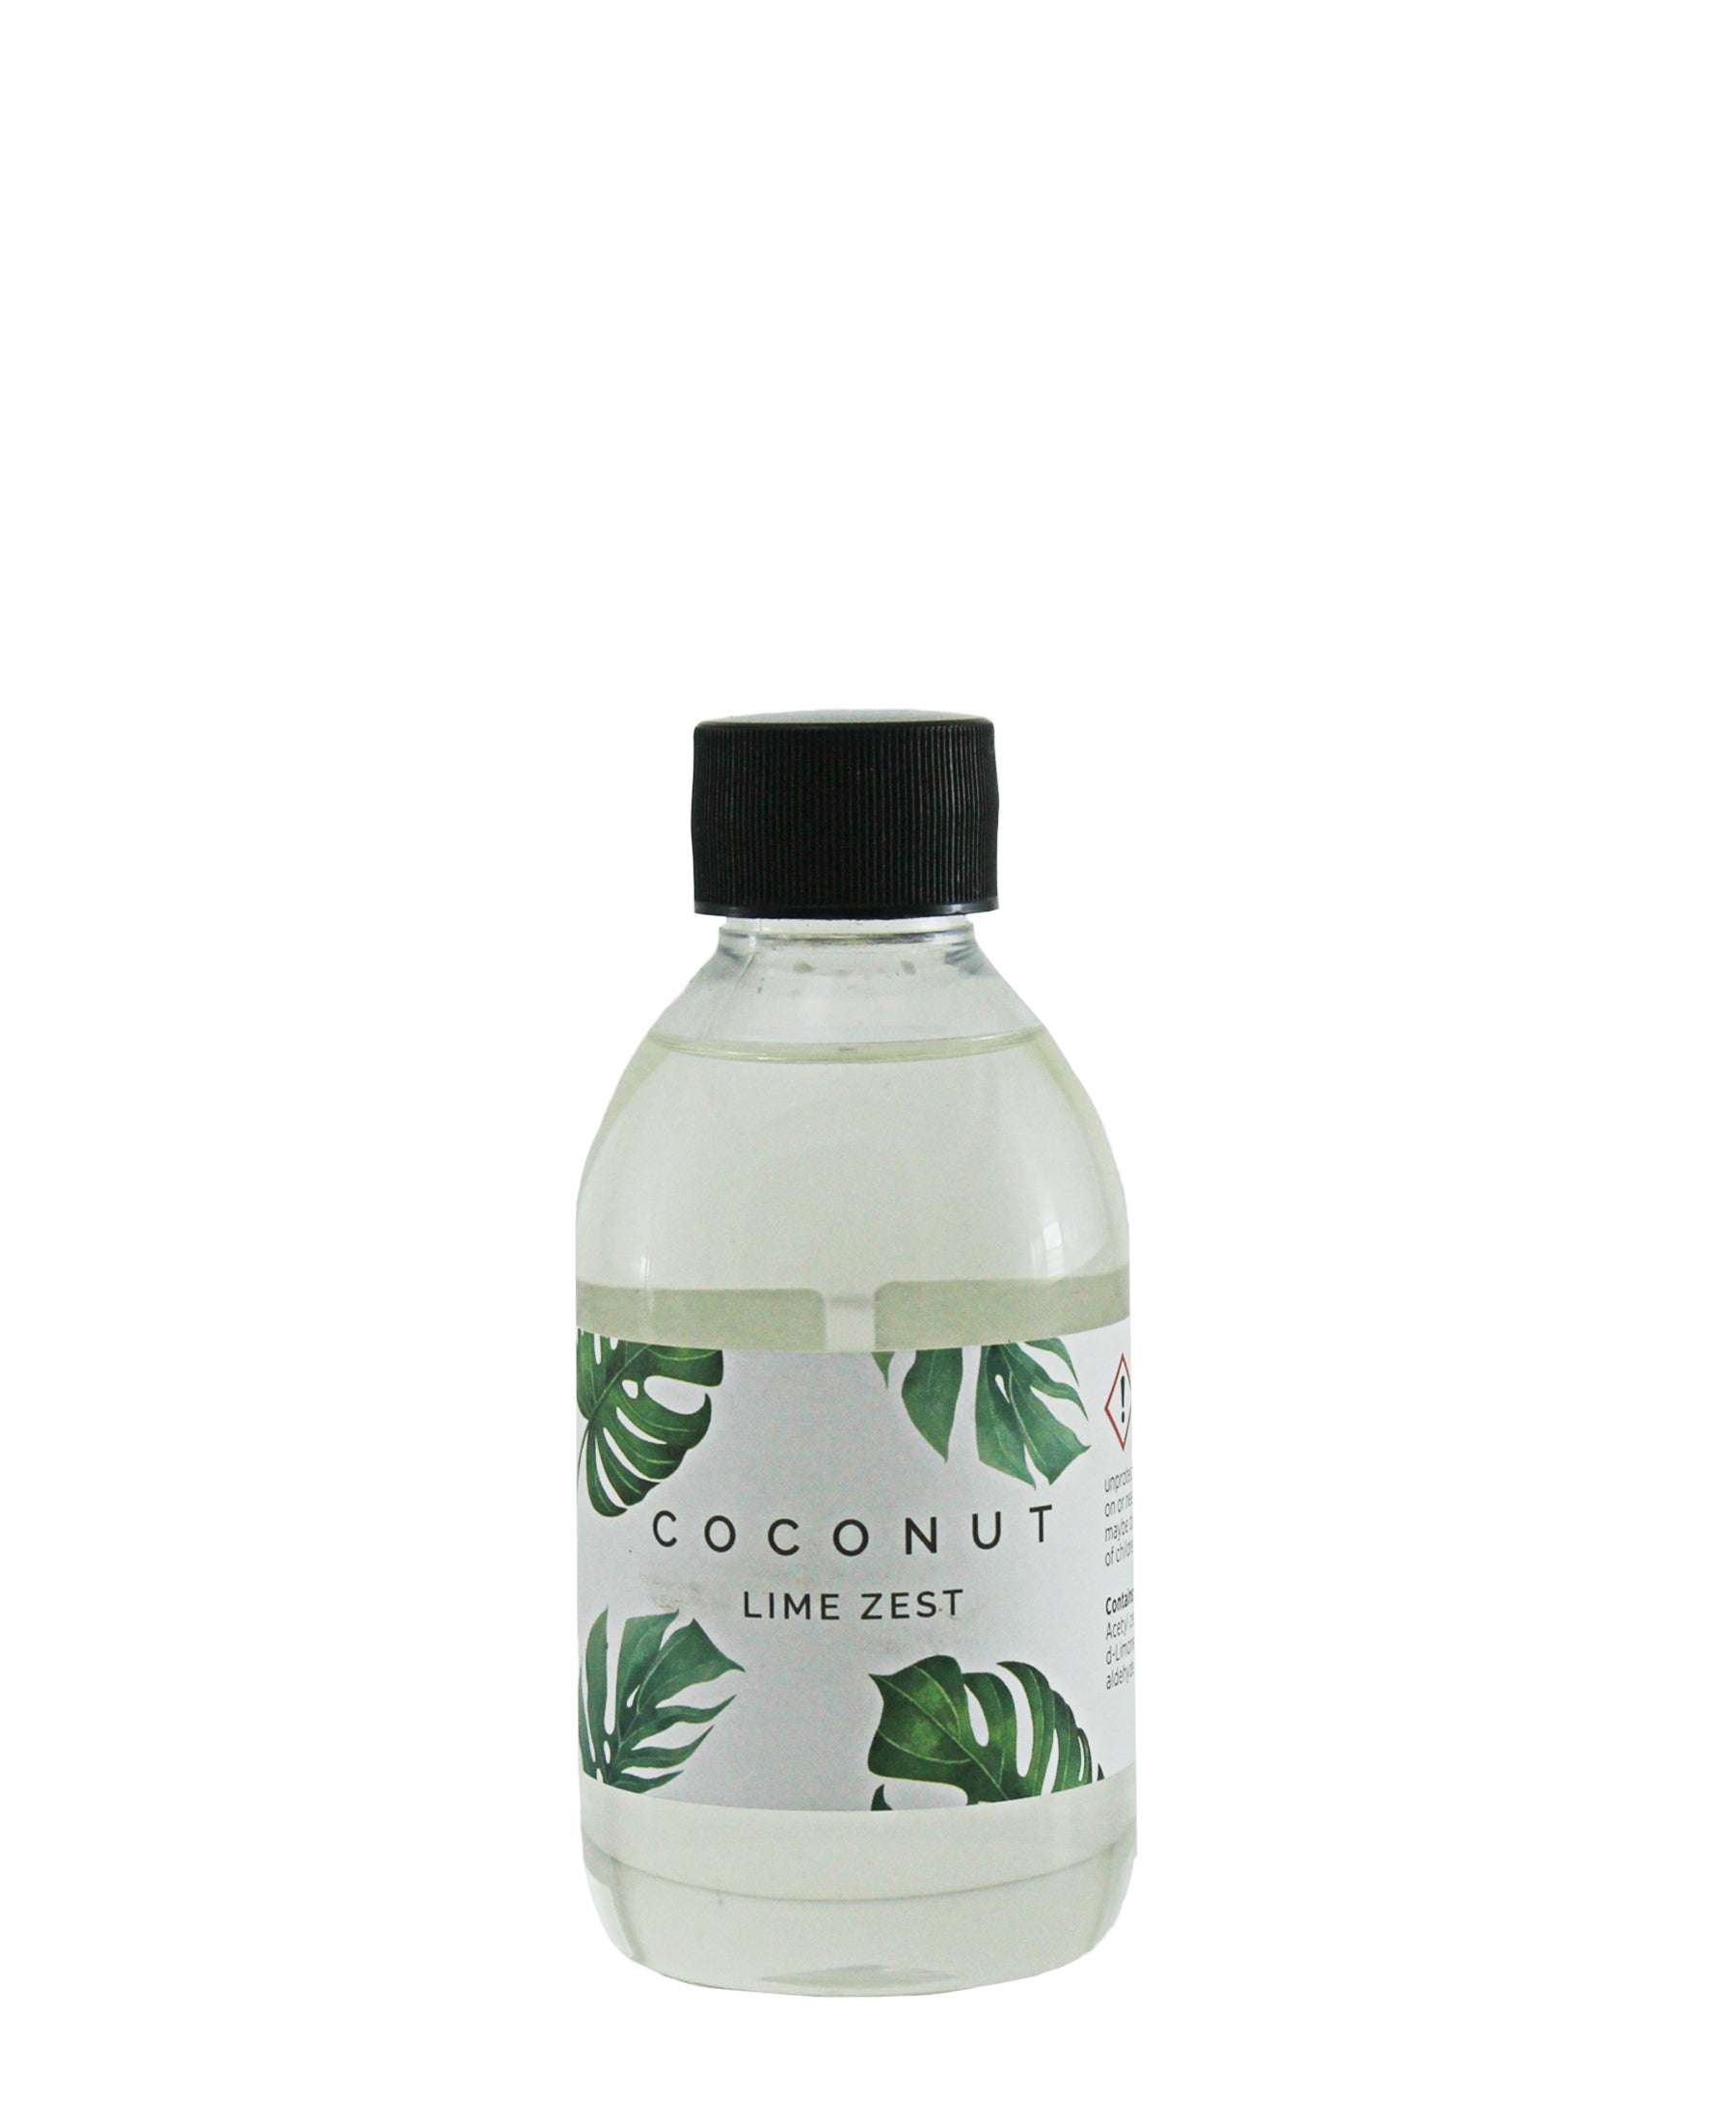 Stoneglow Hibiscus Coconut & Lime Zest Diffuser - Green